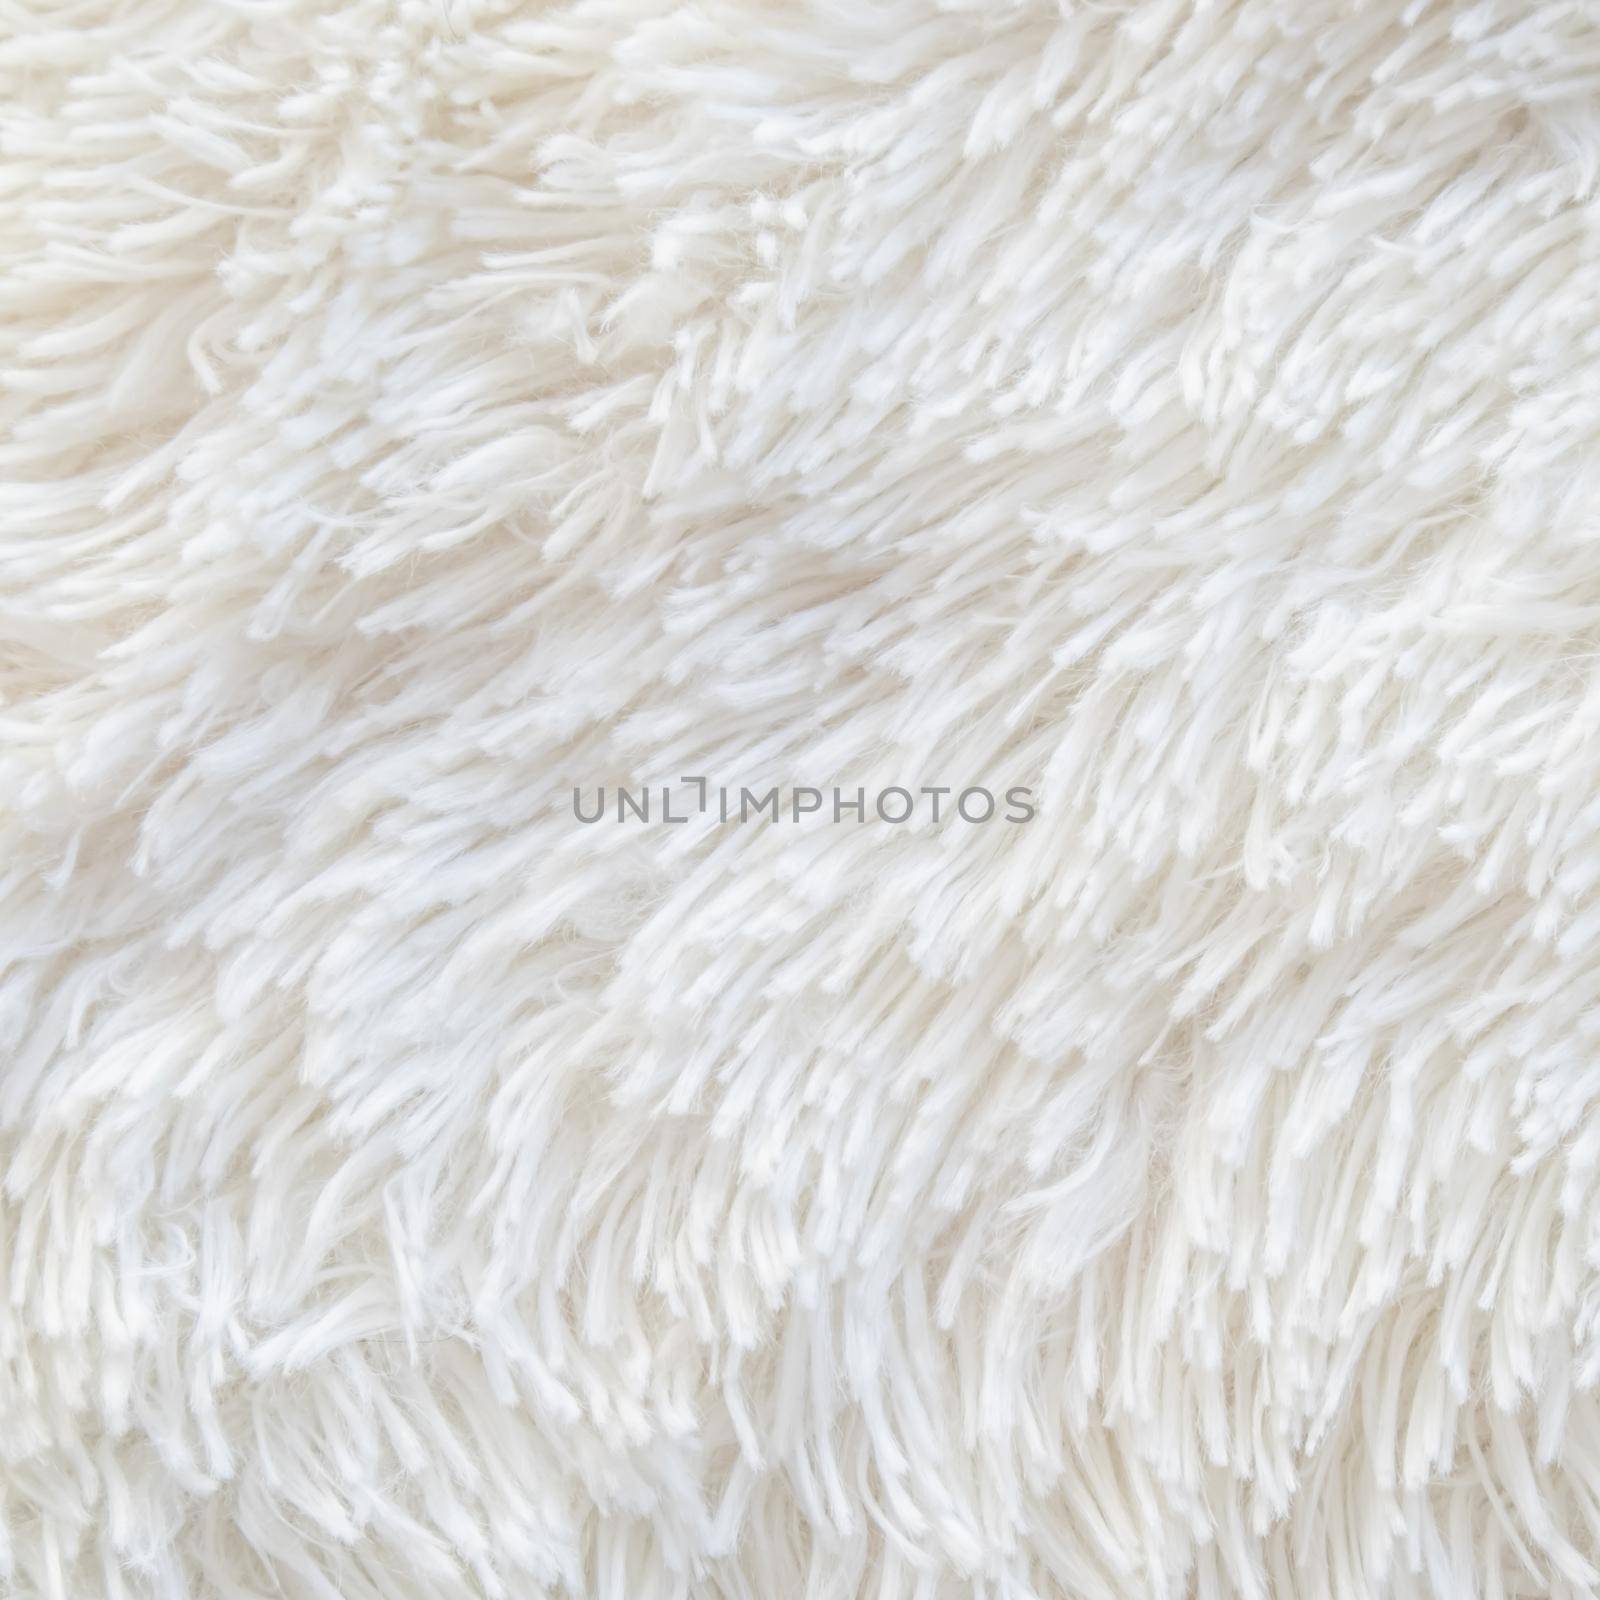 Long pile carpet texture. Abstract background of shaggy white fibers. High quality photo